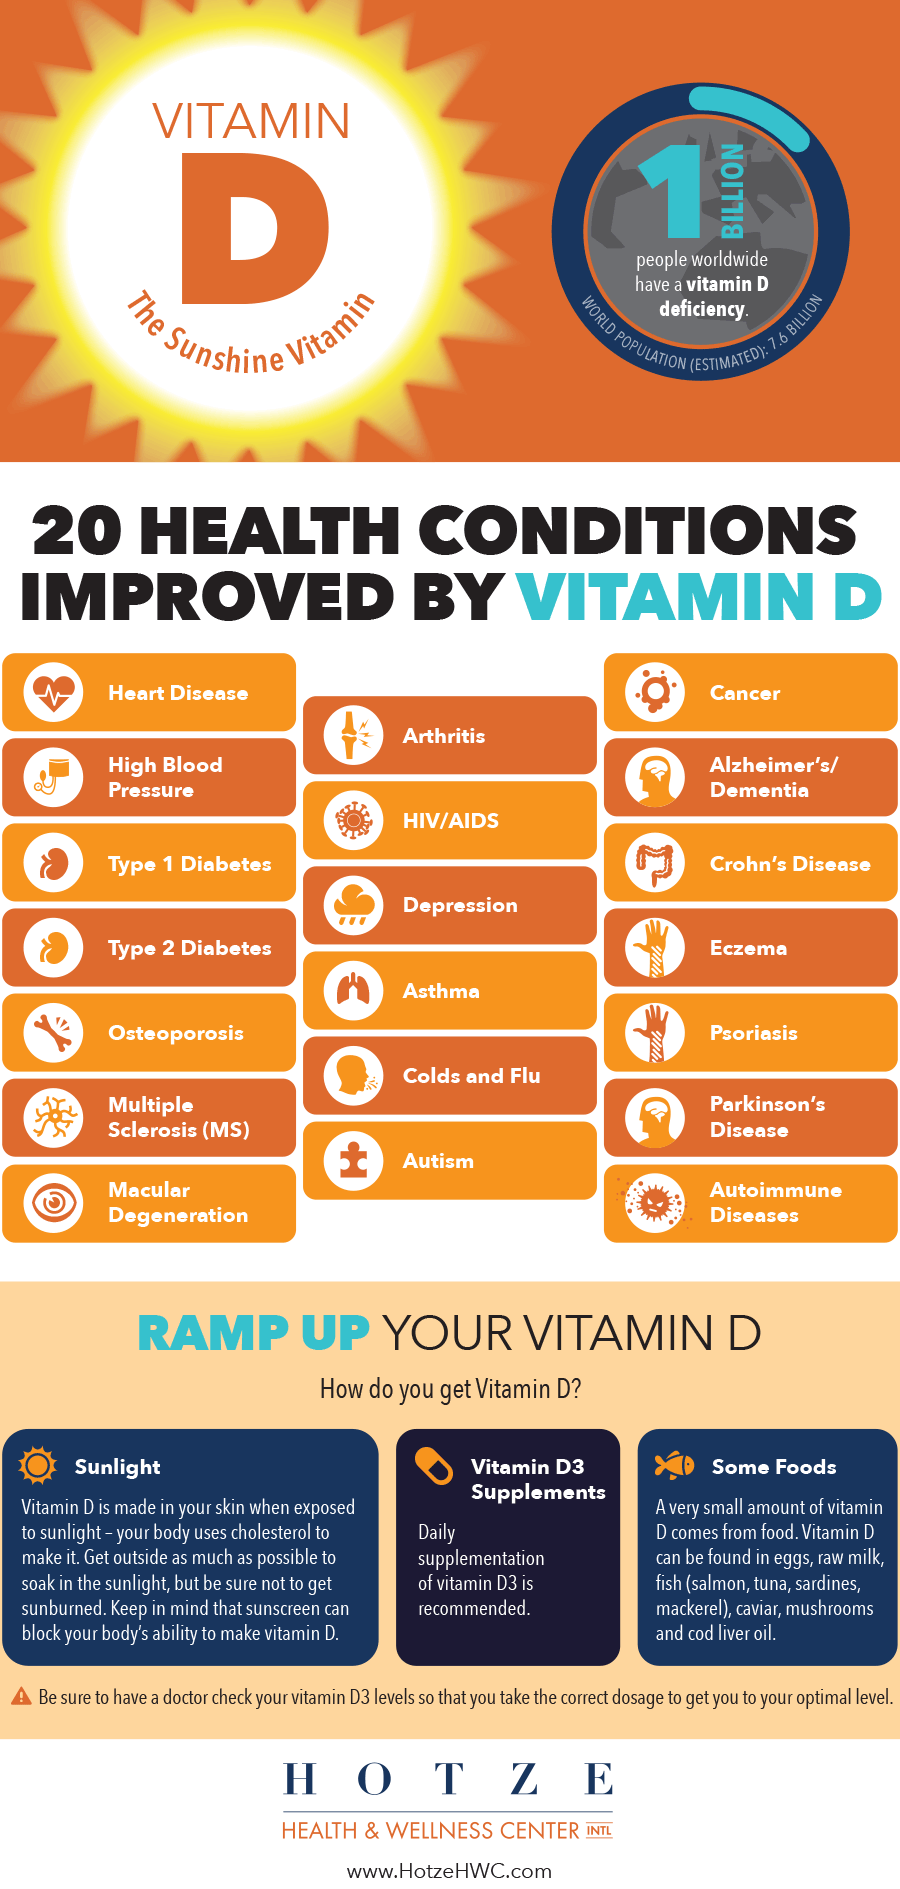 20 Health Conditions Improved by Vitamin D